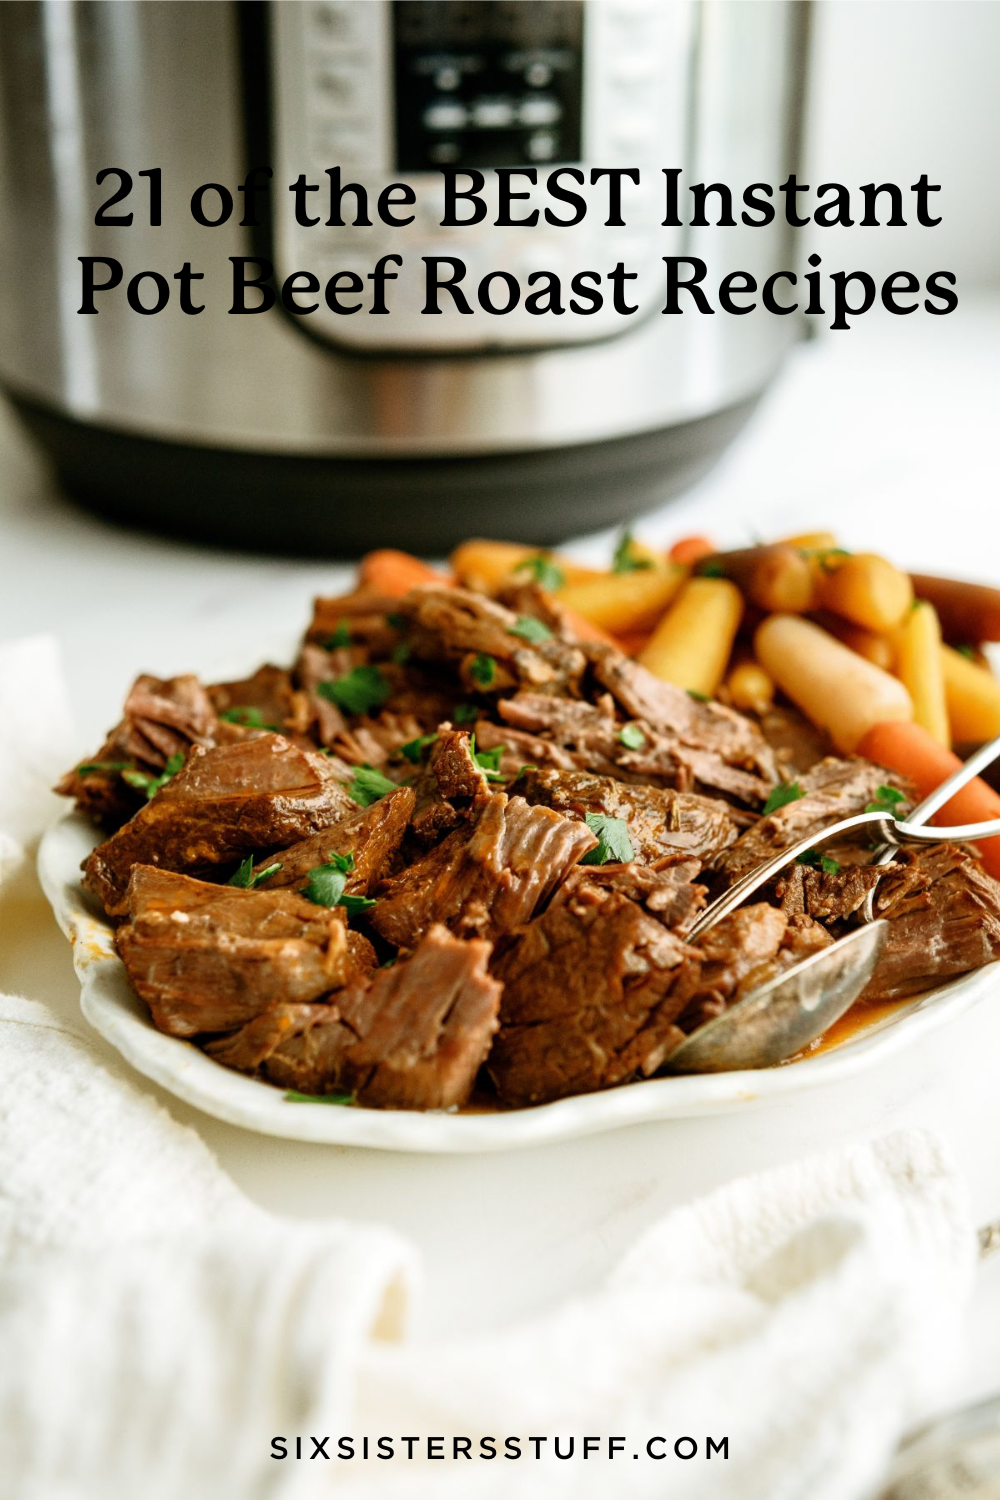 https://www.sixsistersstuff.com/wp-content/uploads/2023/10/21-of-the-BEST-Instant-Pot-Beef-Roast-Recipes.png